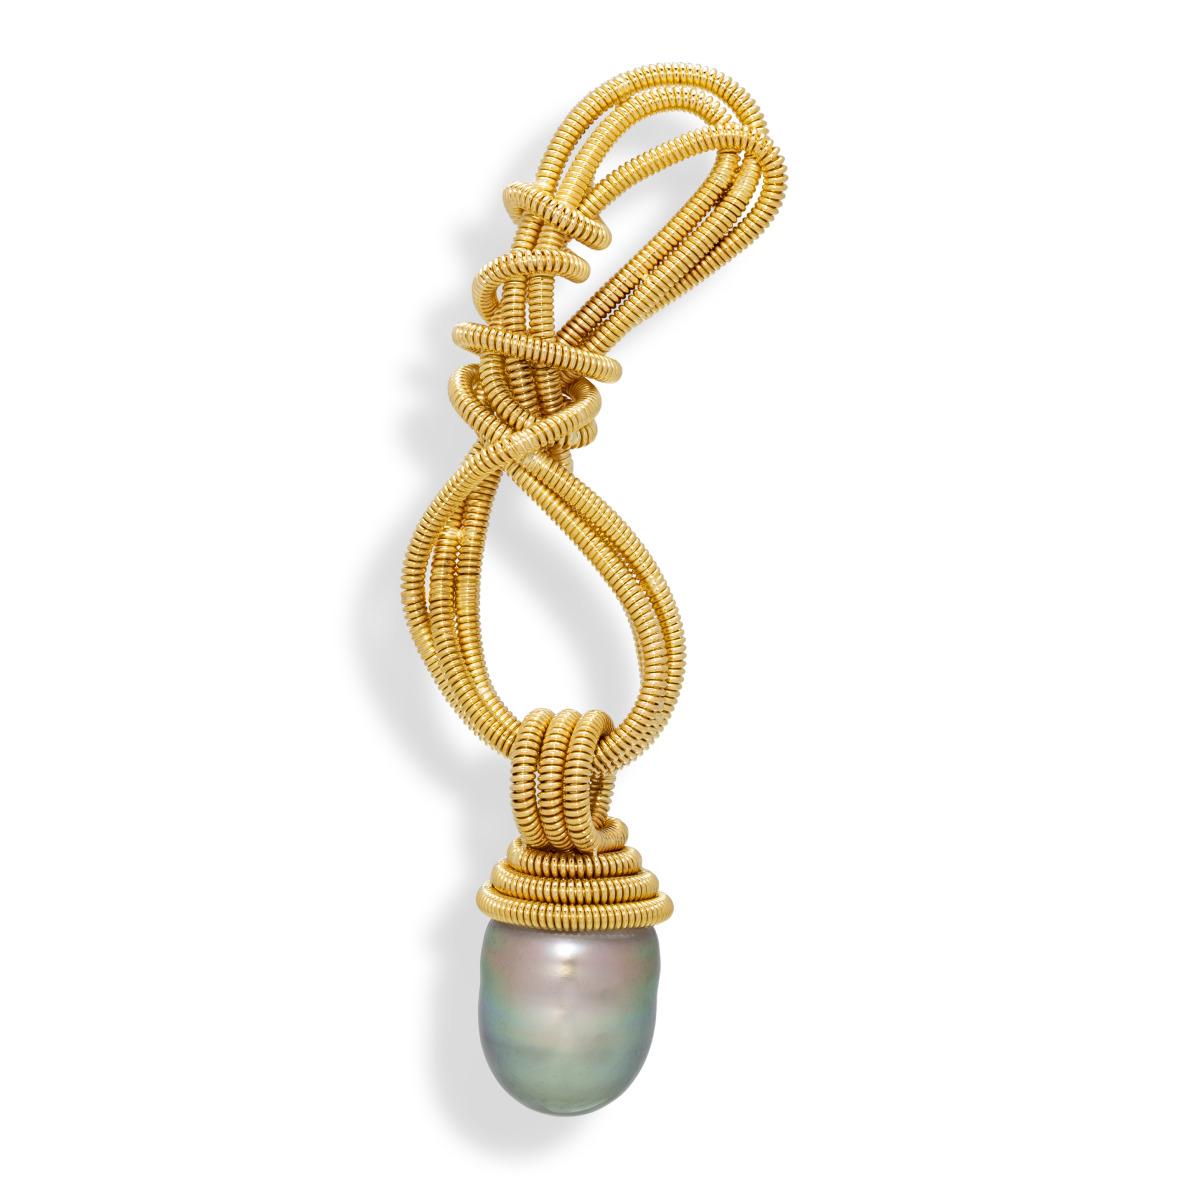 This magnificent brooch showcases Gloria’s signature coil work in 18k yellow gold, woven into a figure eight pattern, and topped off with a stunning Tahitian pearl for effect. Wear this brooch on either the length or the width to suit your own